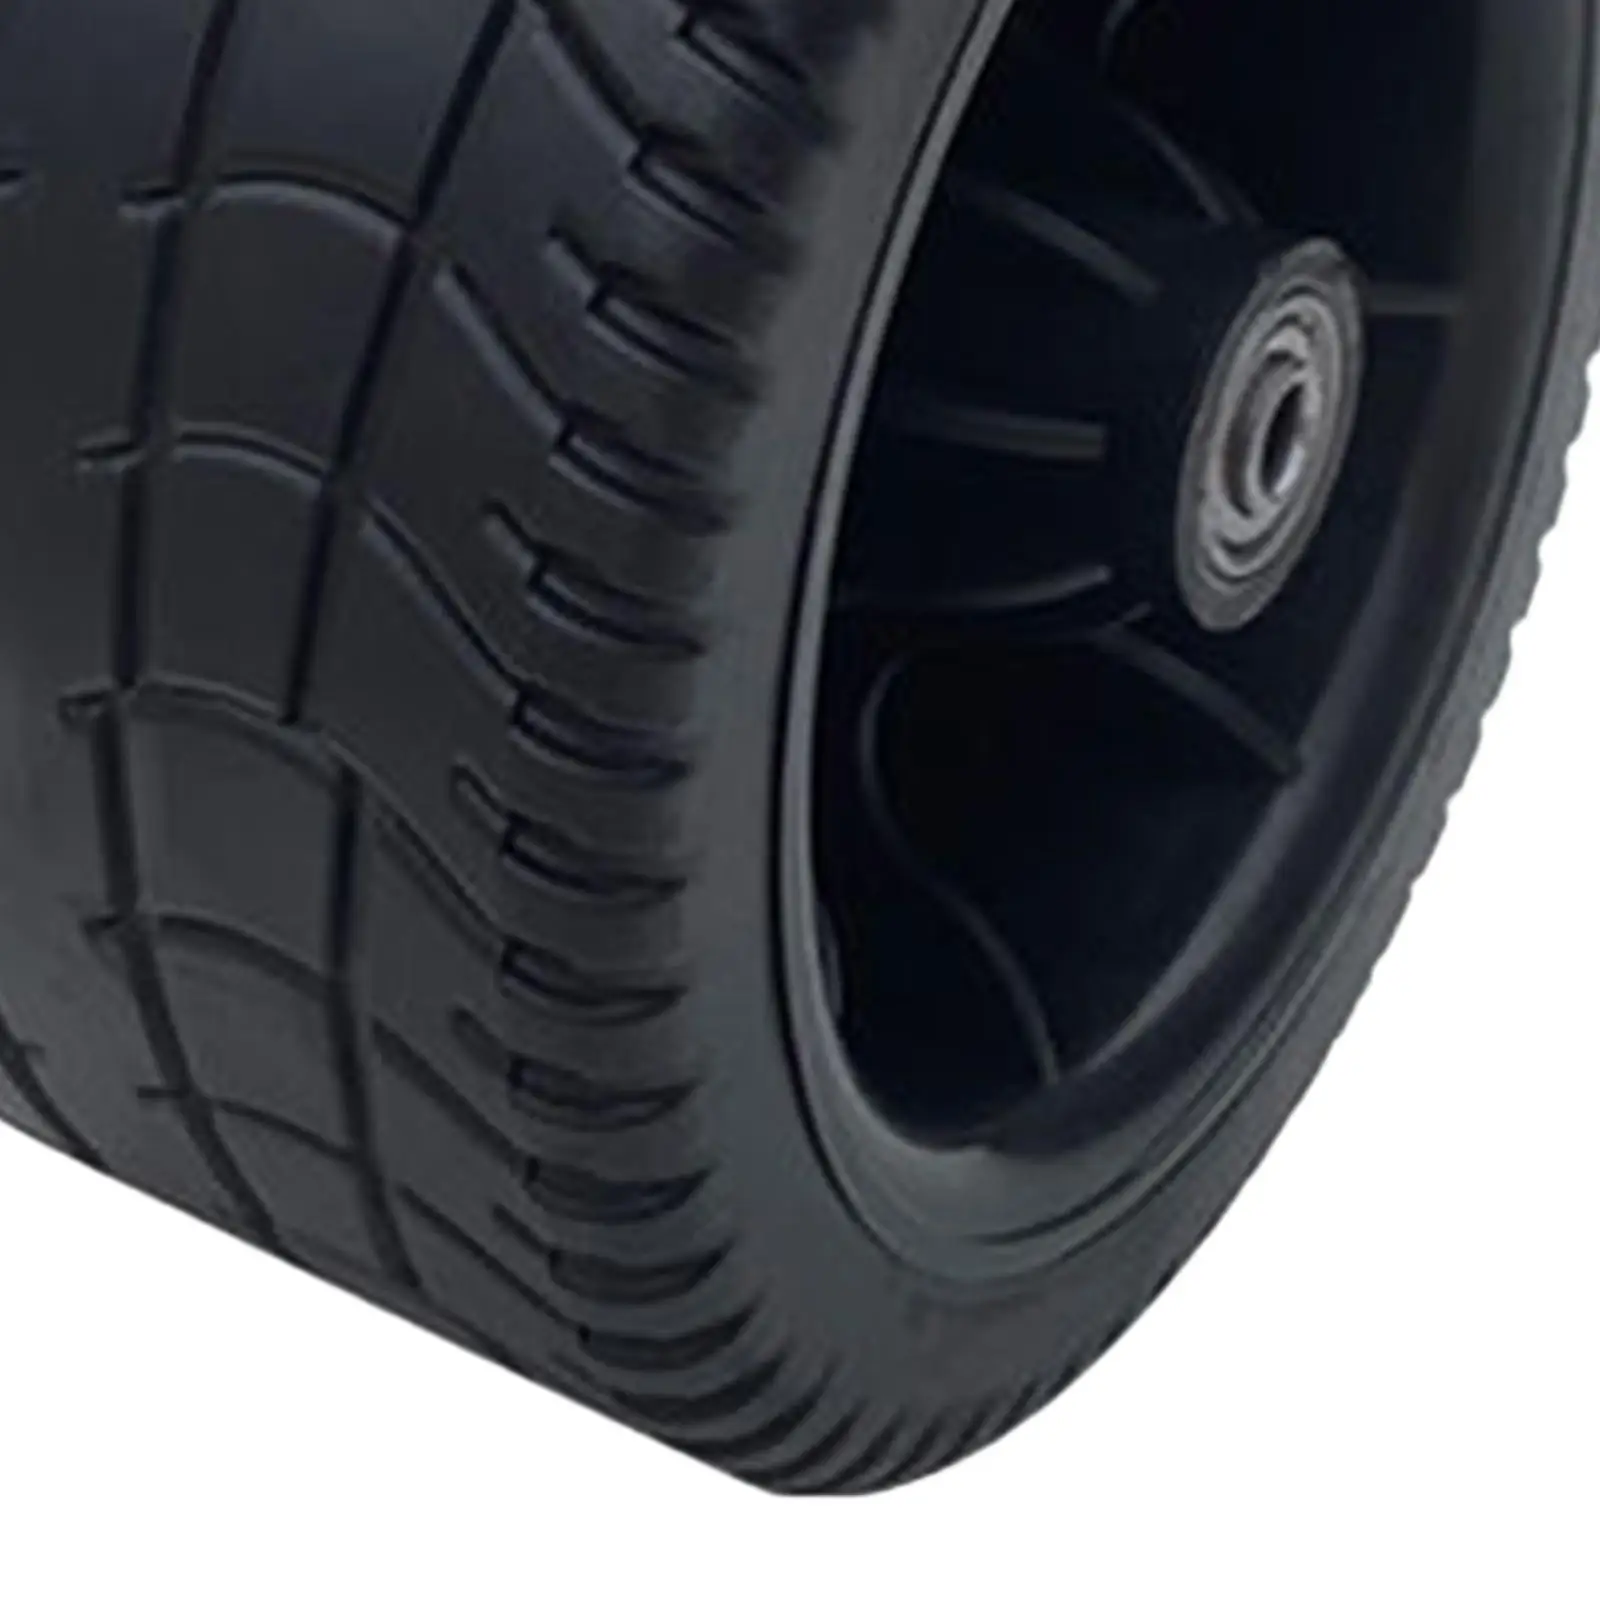 4inch Wide Wagon Cart Wheel PP Tires Durable Black Easily Install Accessory Puncture Proof for Hand Trucks and Yard Trailers